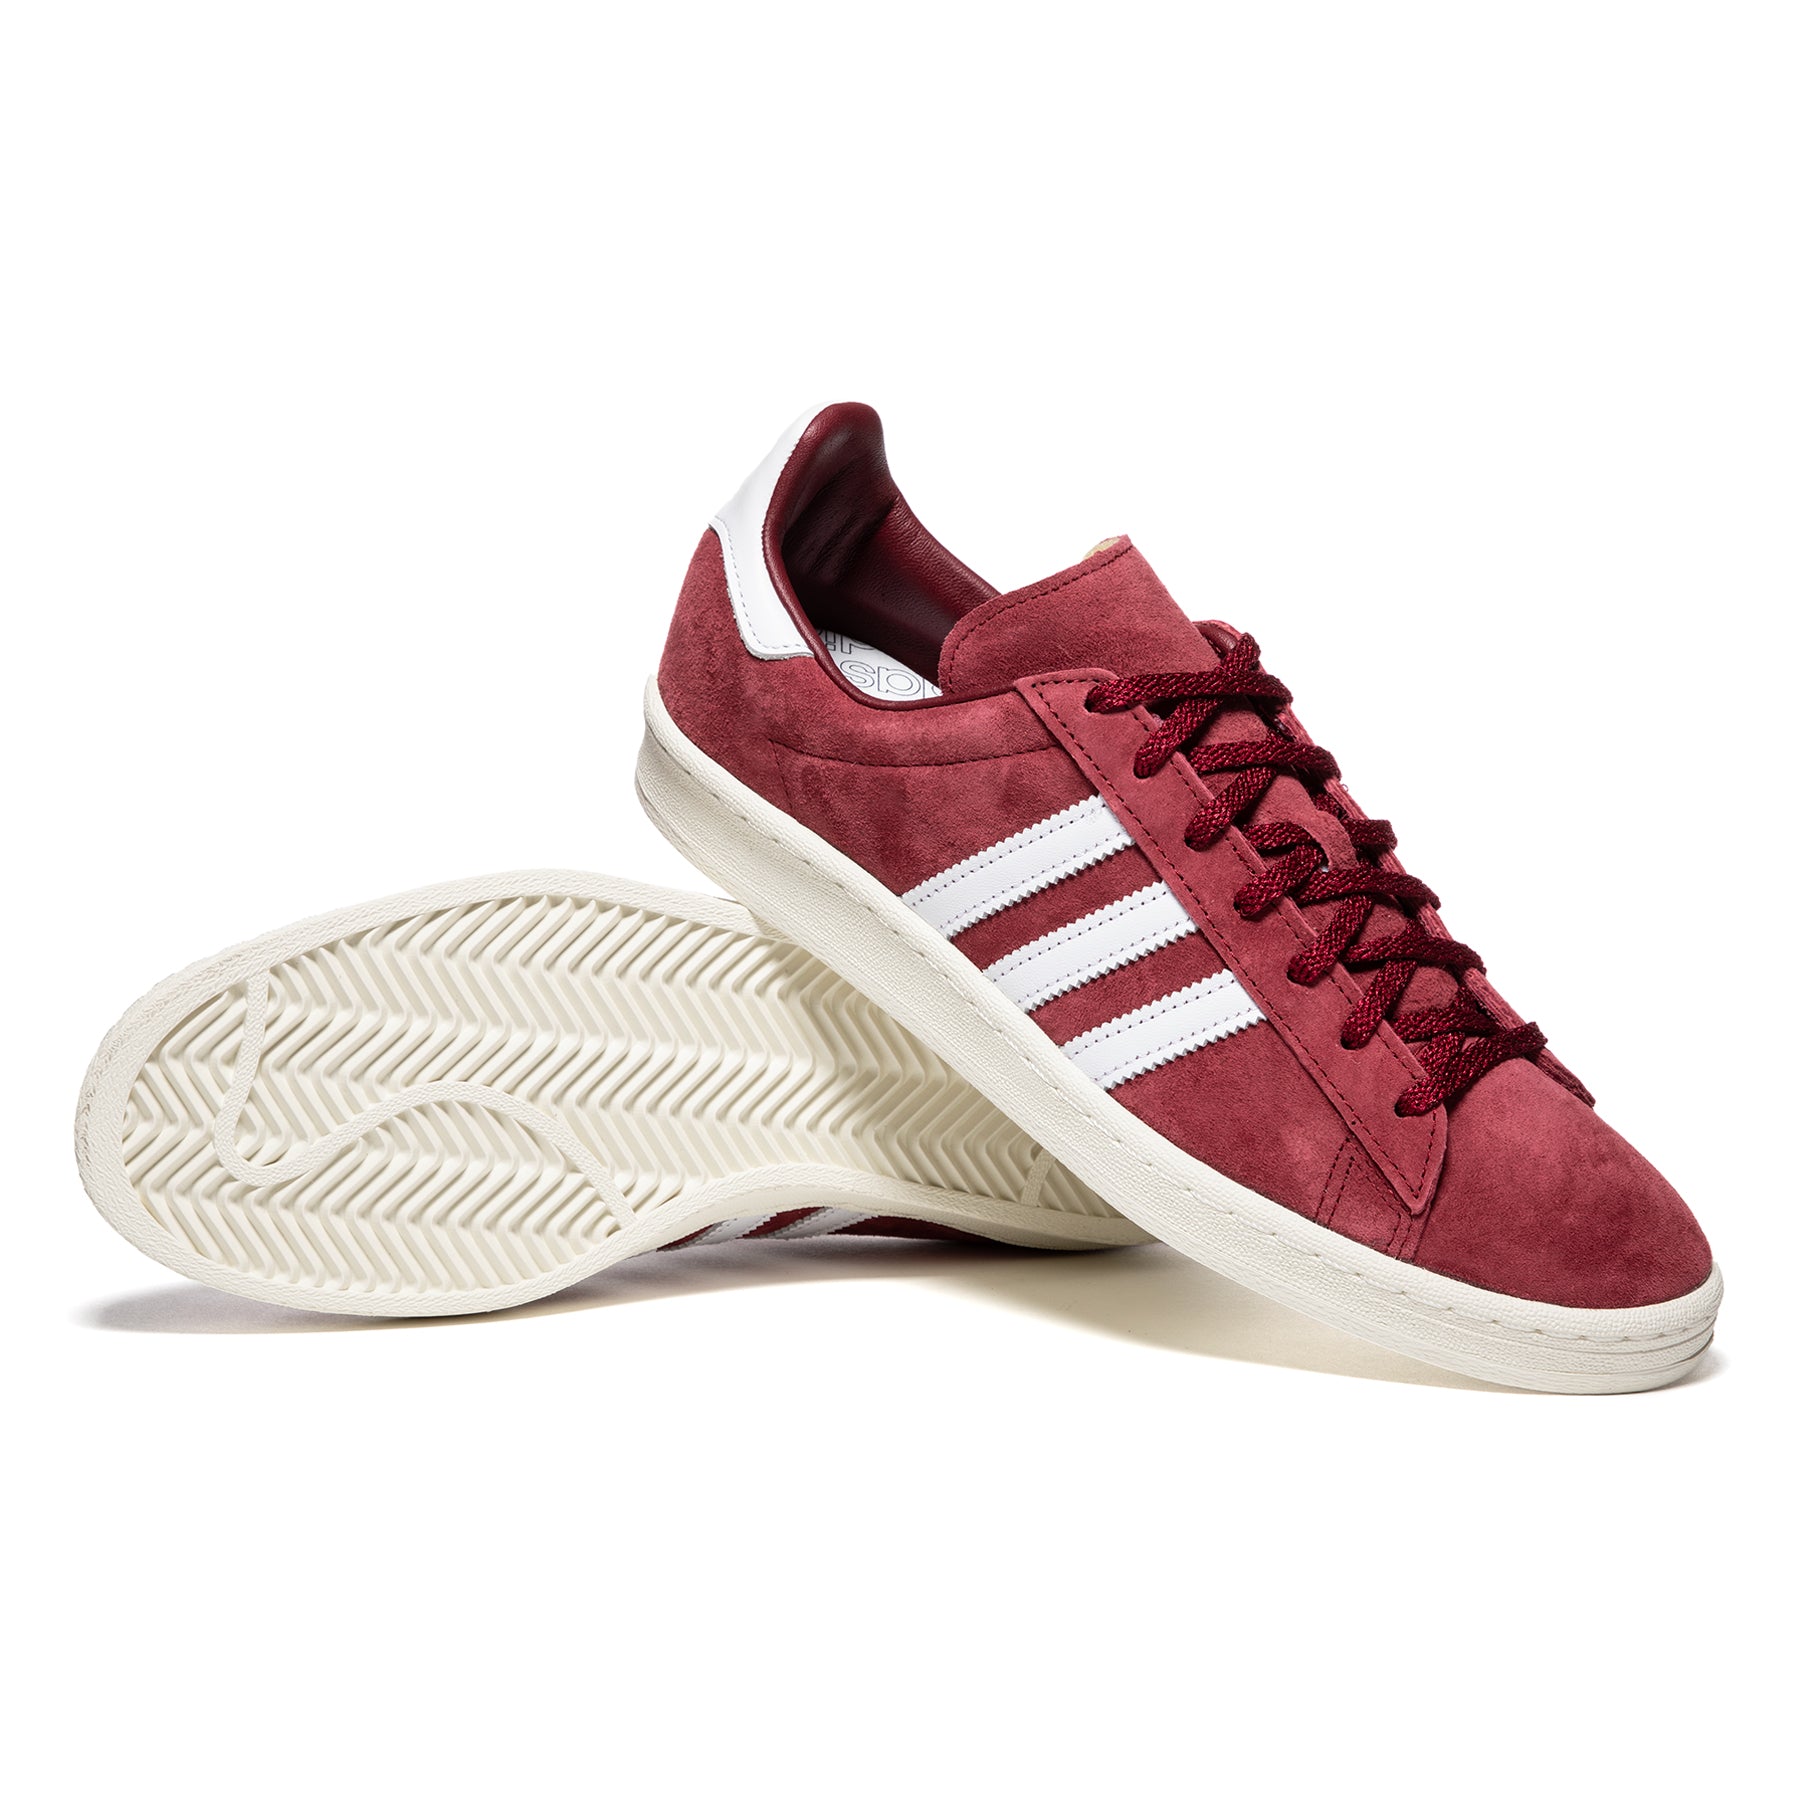 Campus 80s (Burgundy/Feather White/Off White) – Concepts